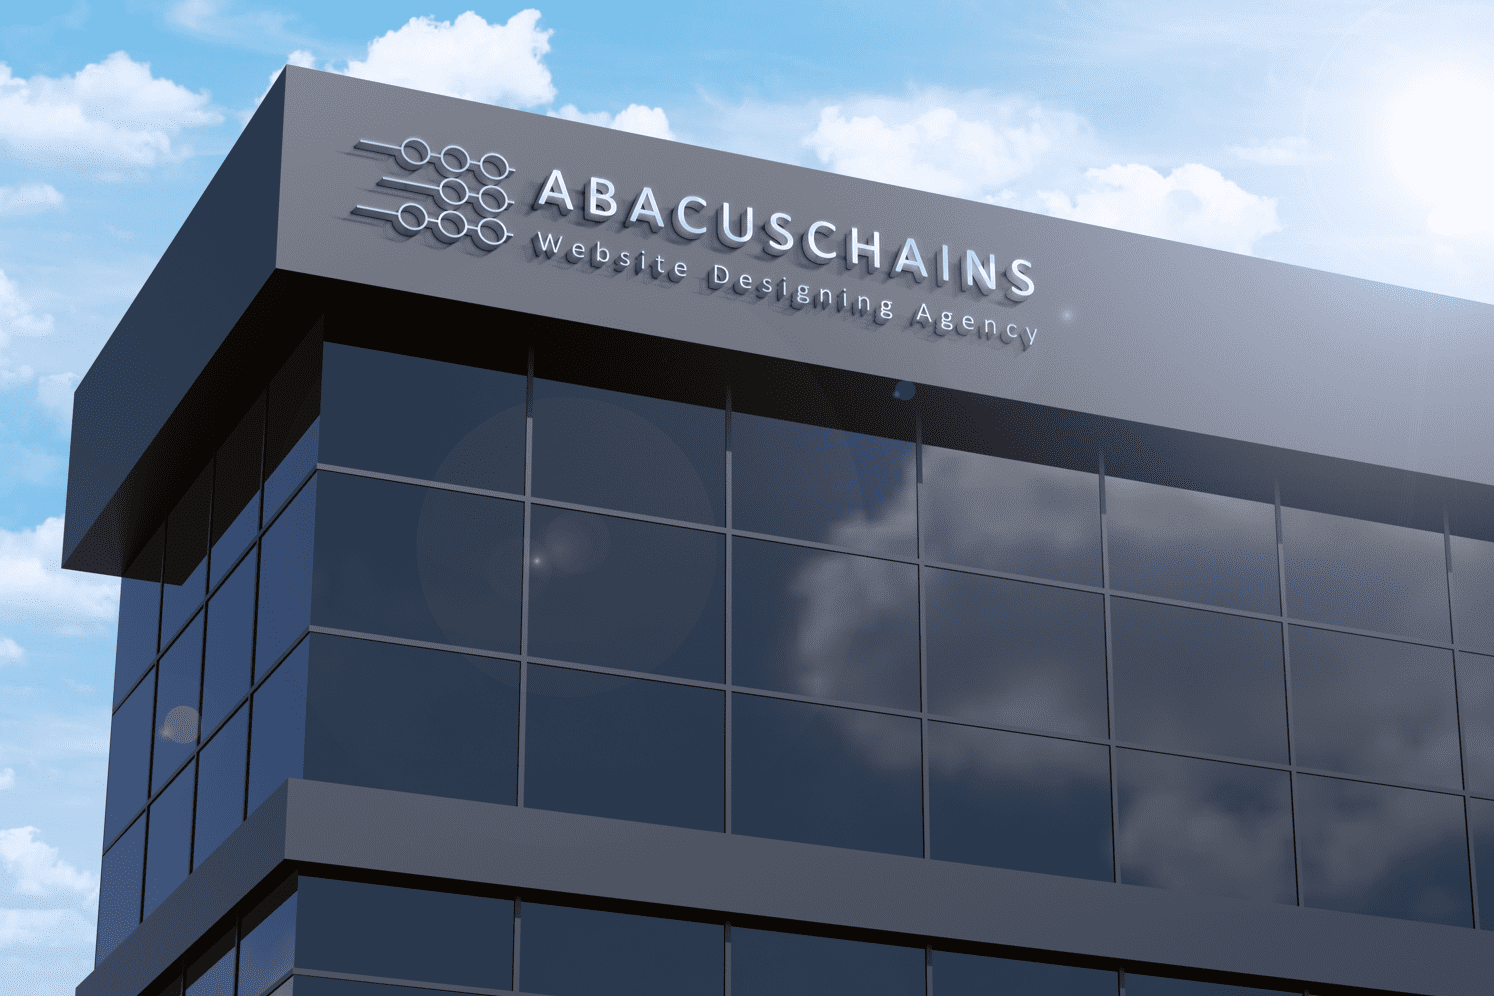 Abacucschains Website Designing Agency UK Office Building Image